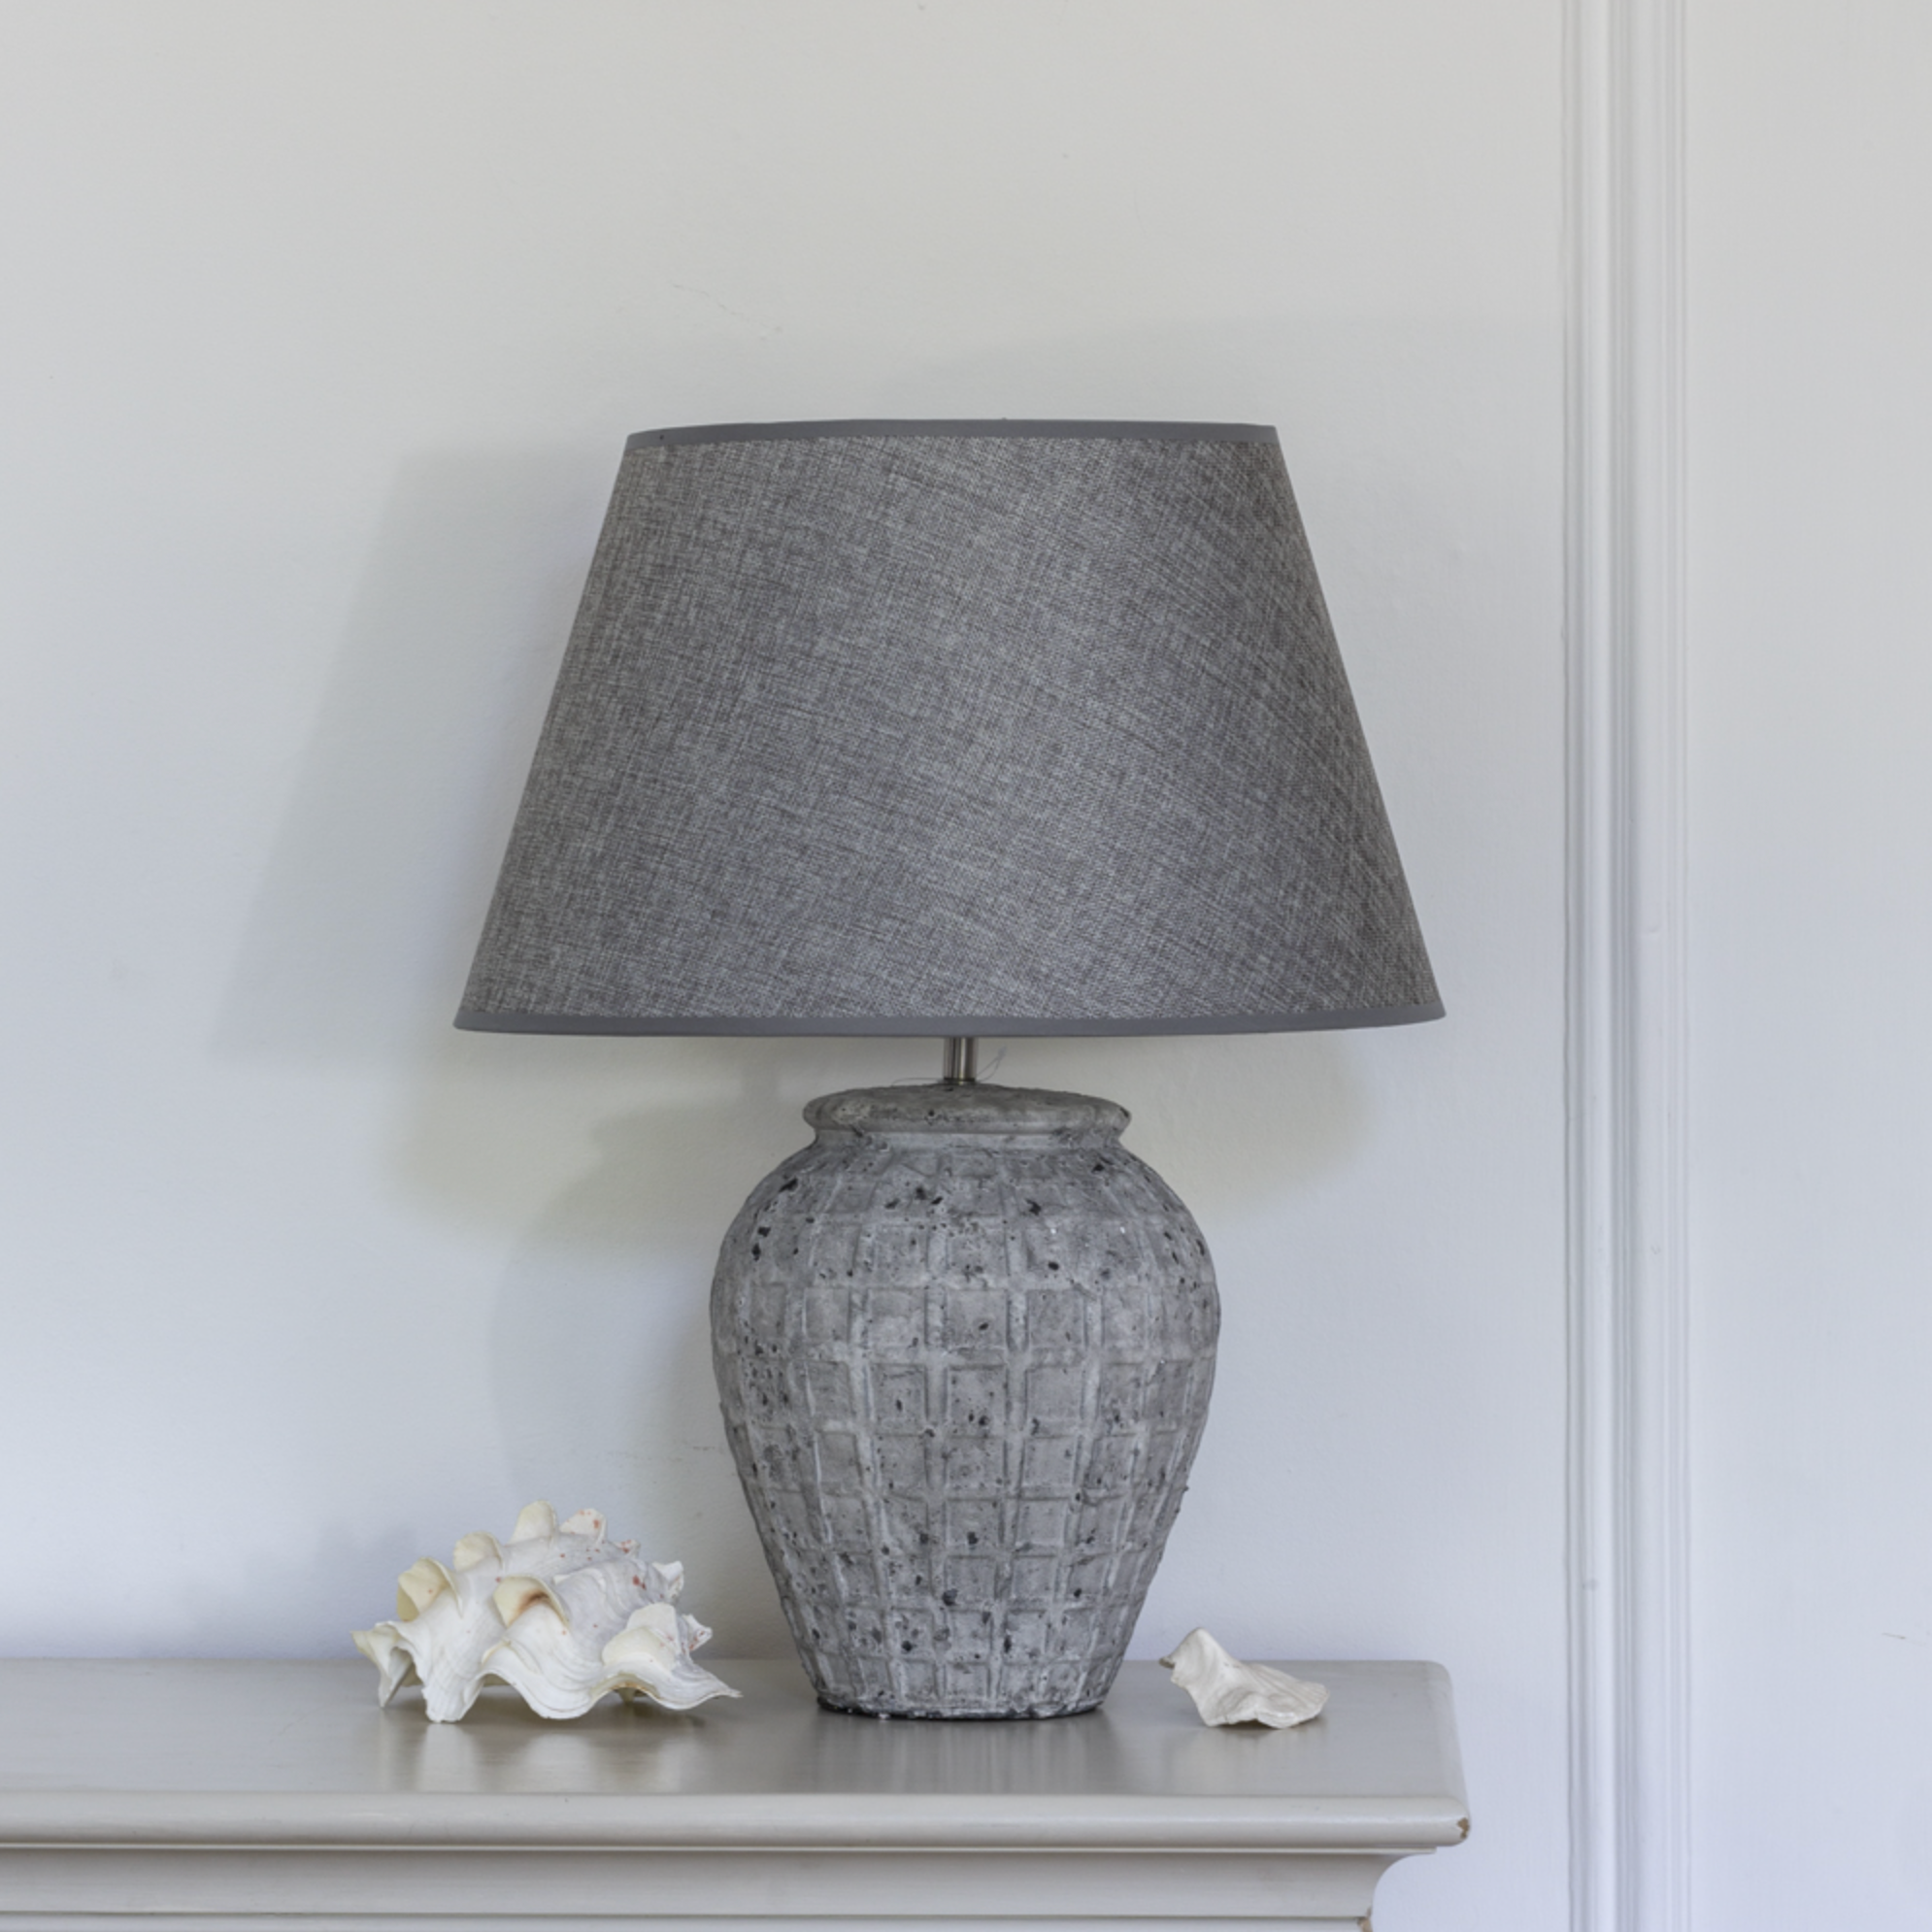 Grey Geometric Ceramic Lamp with Shade against panelled wall.